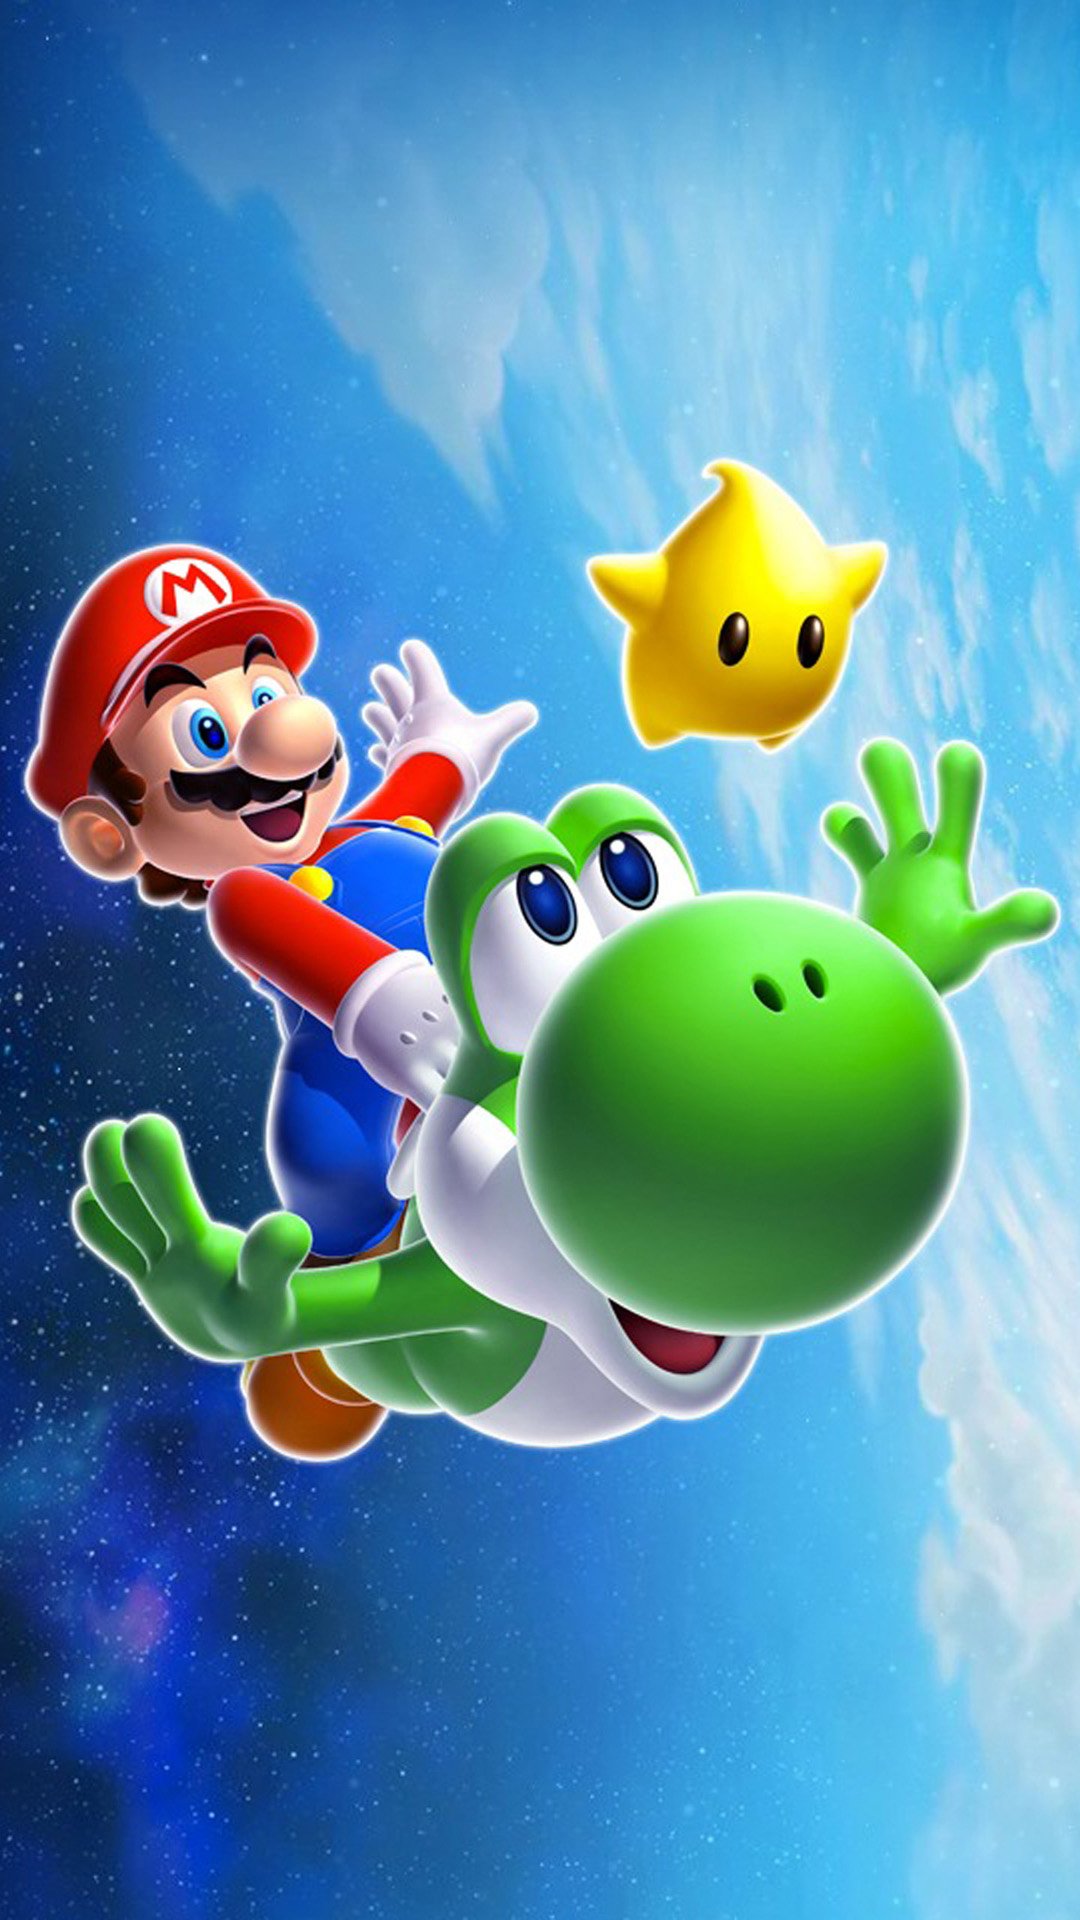 Free download hd mario galaxy yoshi wallpapers for mobile phone 1080x1920 f...